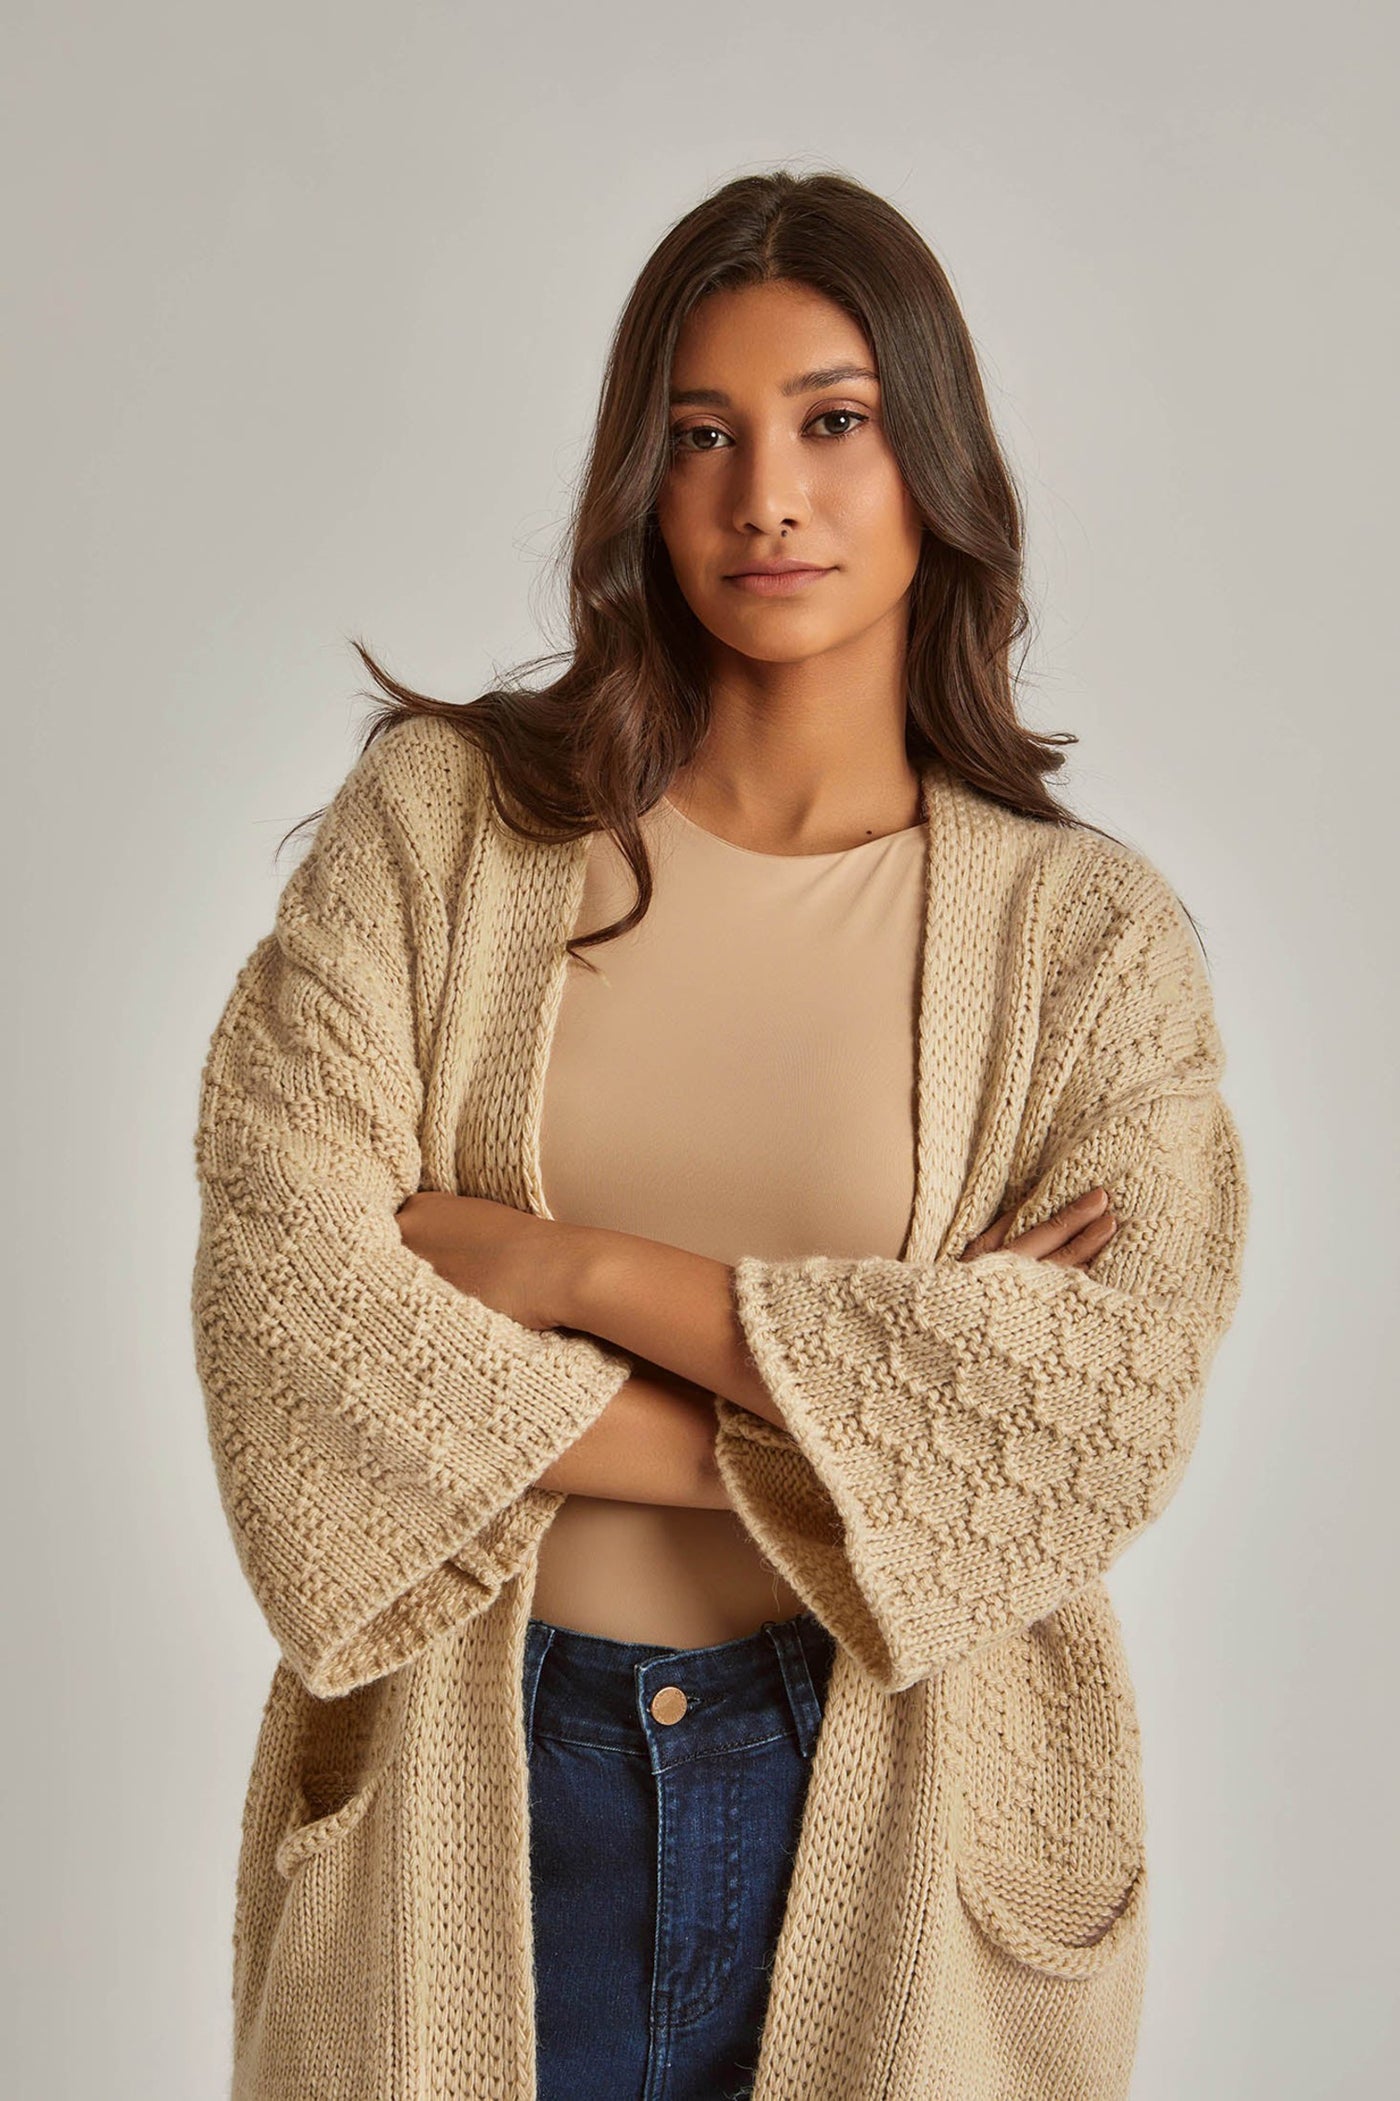 Cardigan - Slip on - Knitted